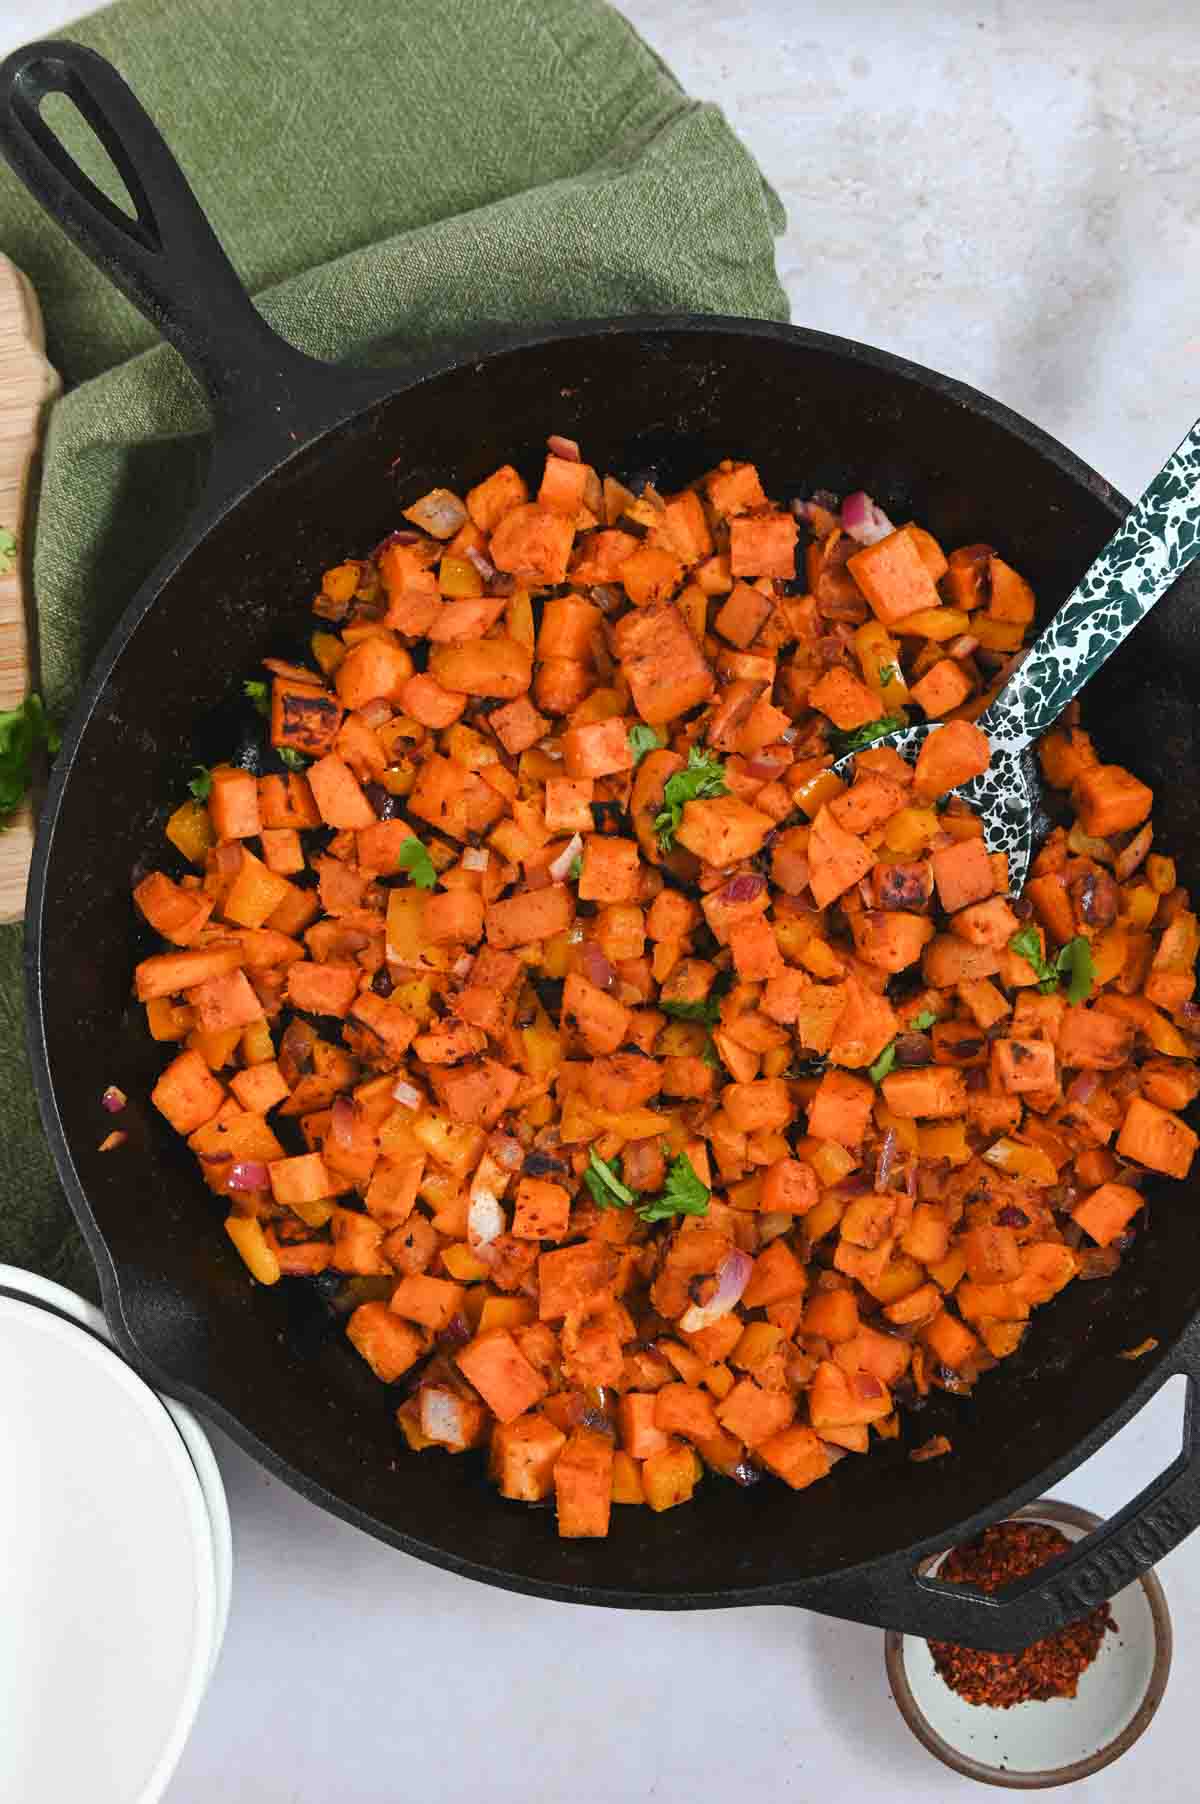 Overhead view of black cast iron skillet filled with sweet potato hash.